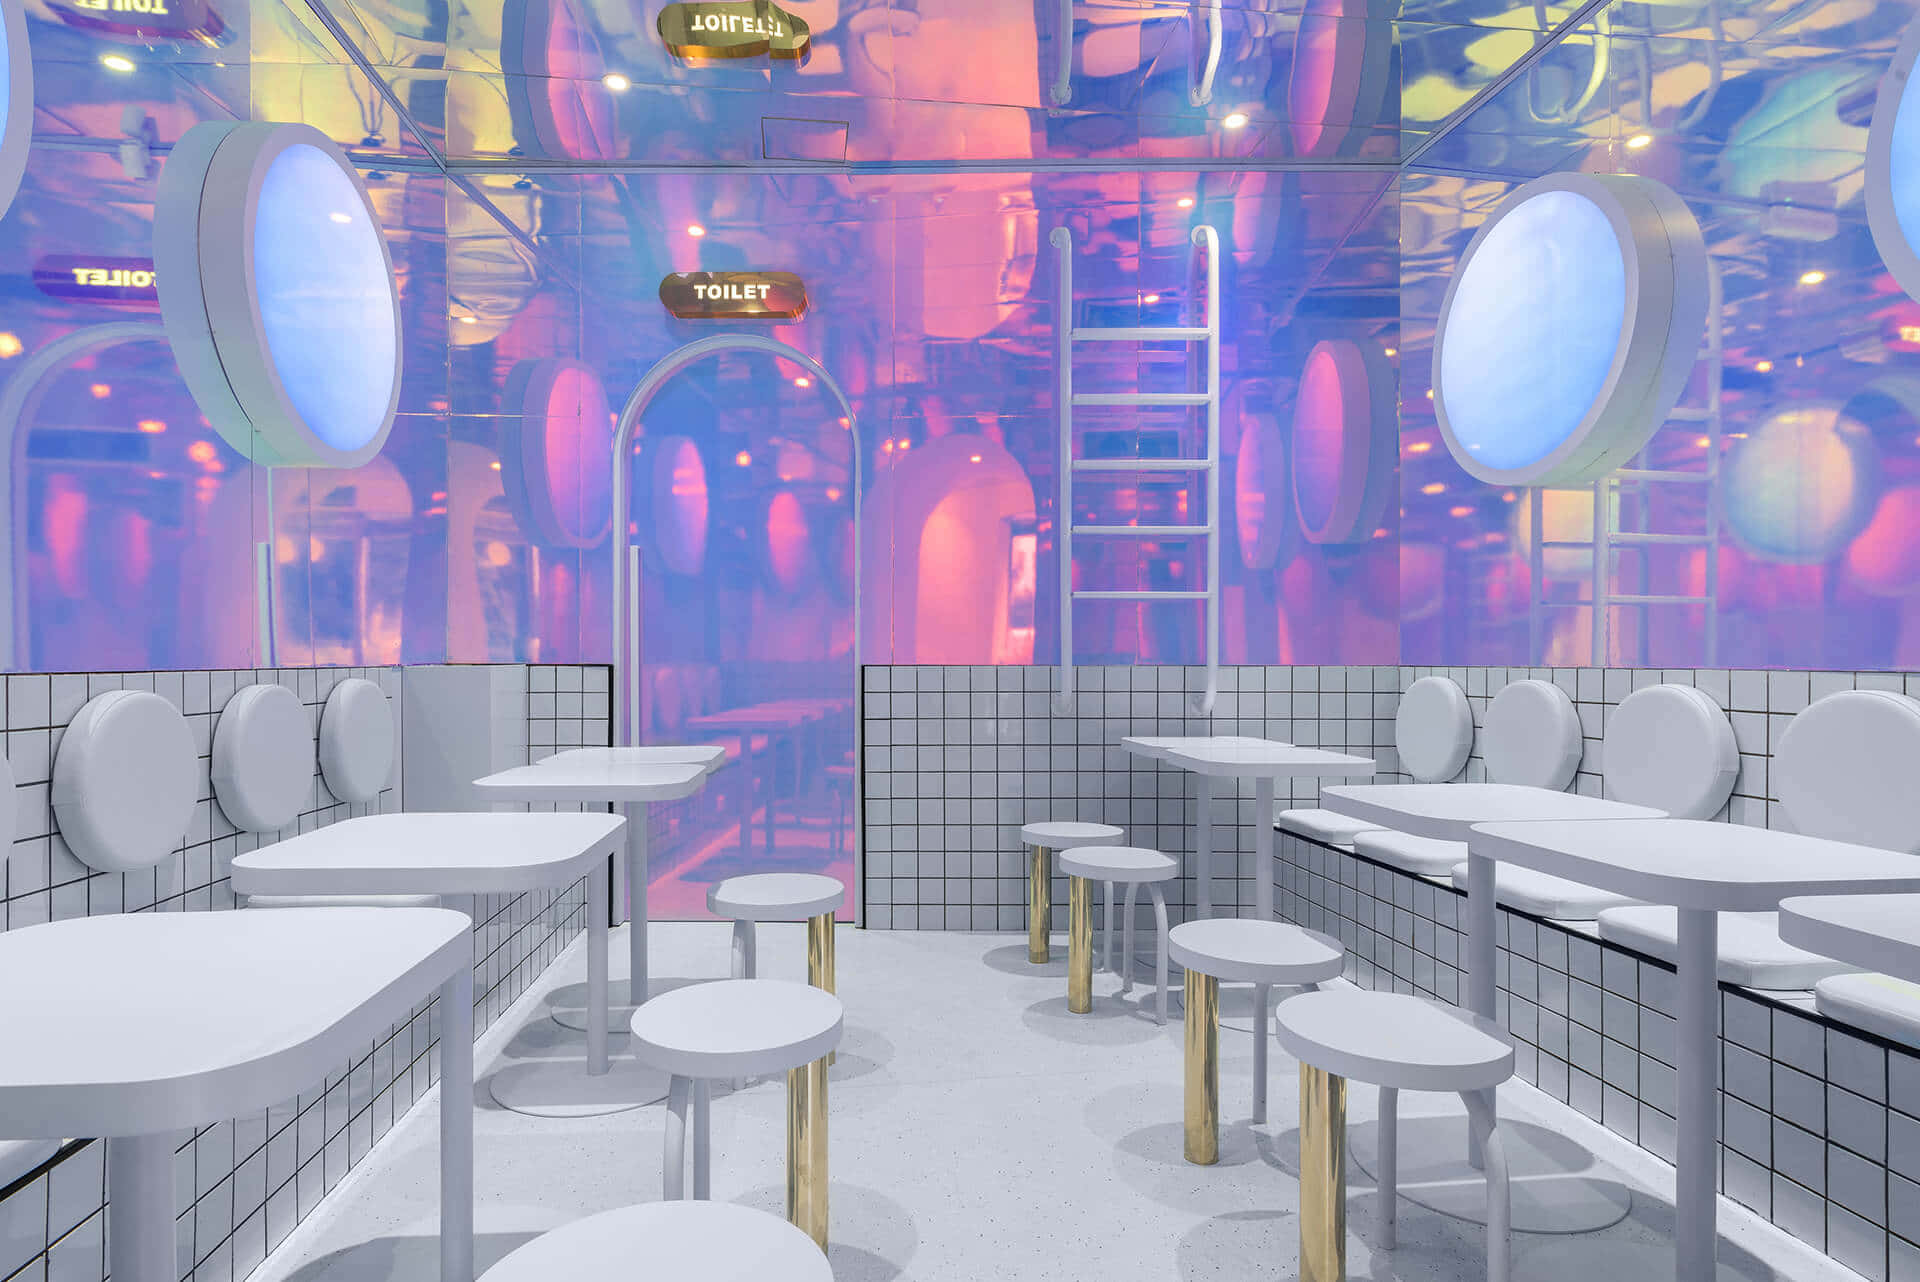 '80s-inspired Interior Of A Burger Joint Wallpaper